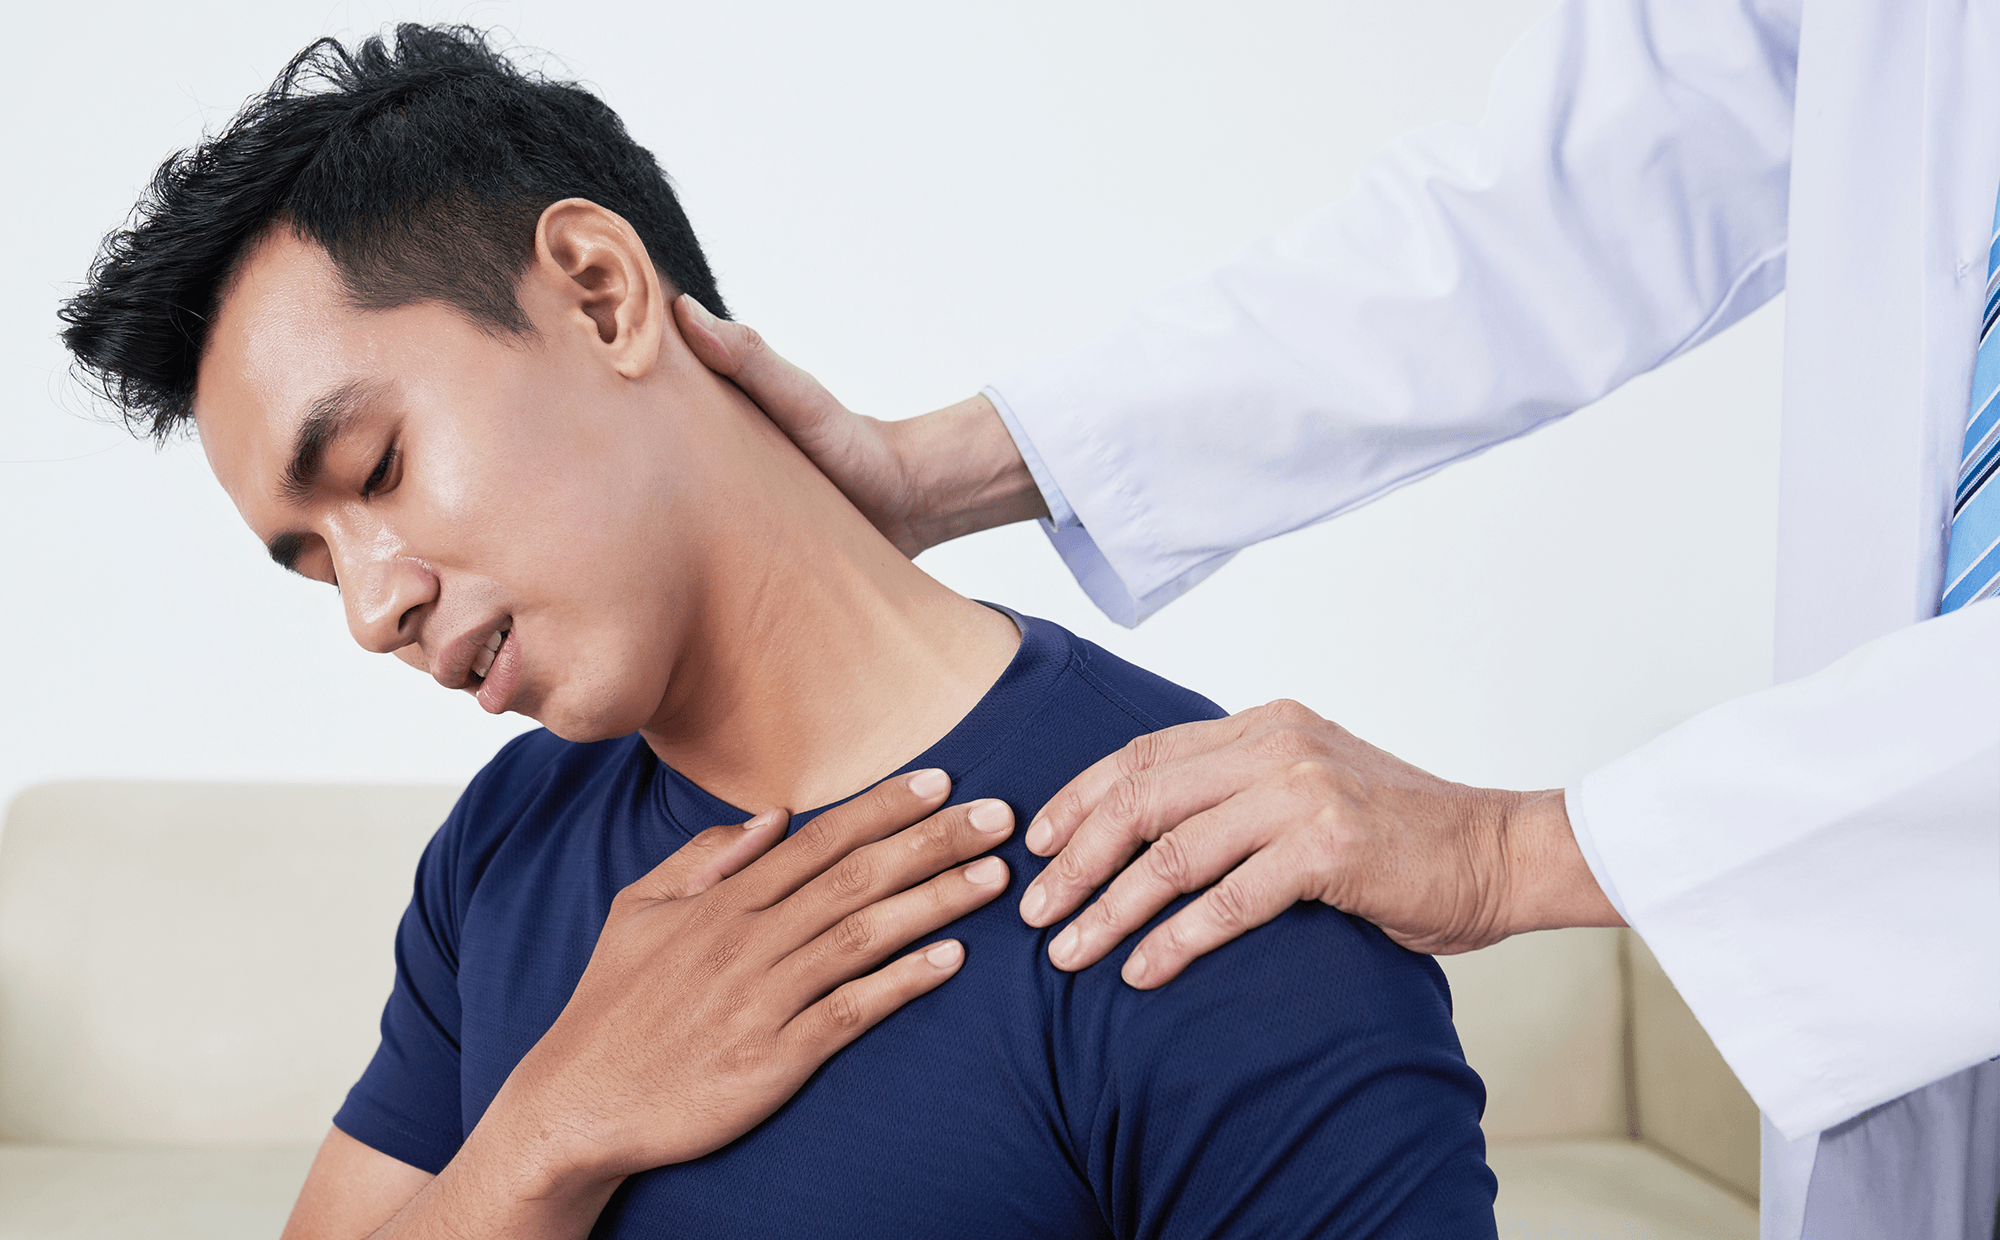 Why Does My Neck Feel Tight? Causes & Treatment for Tight Neck Muscles